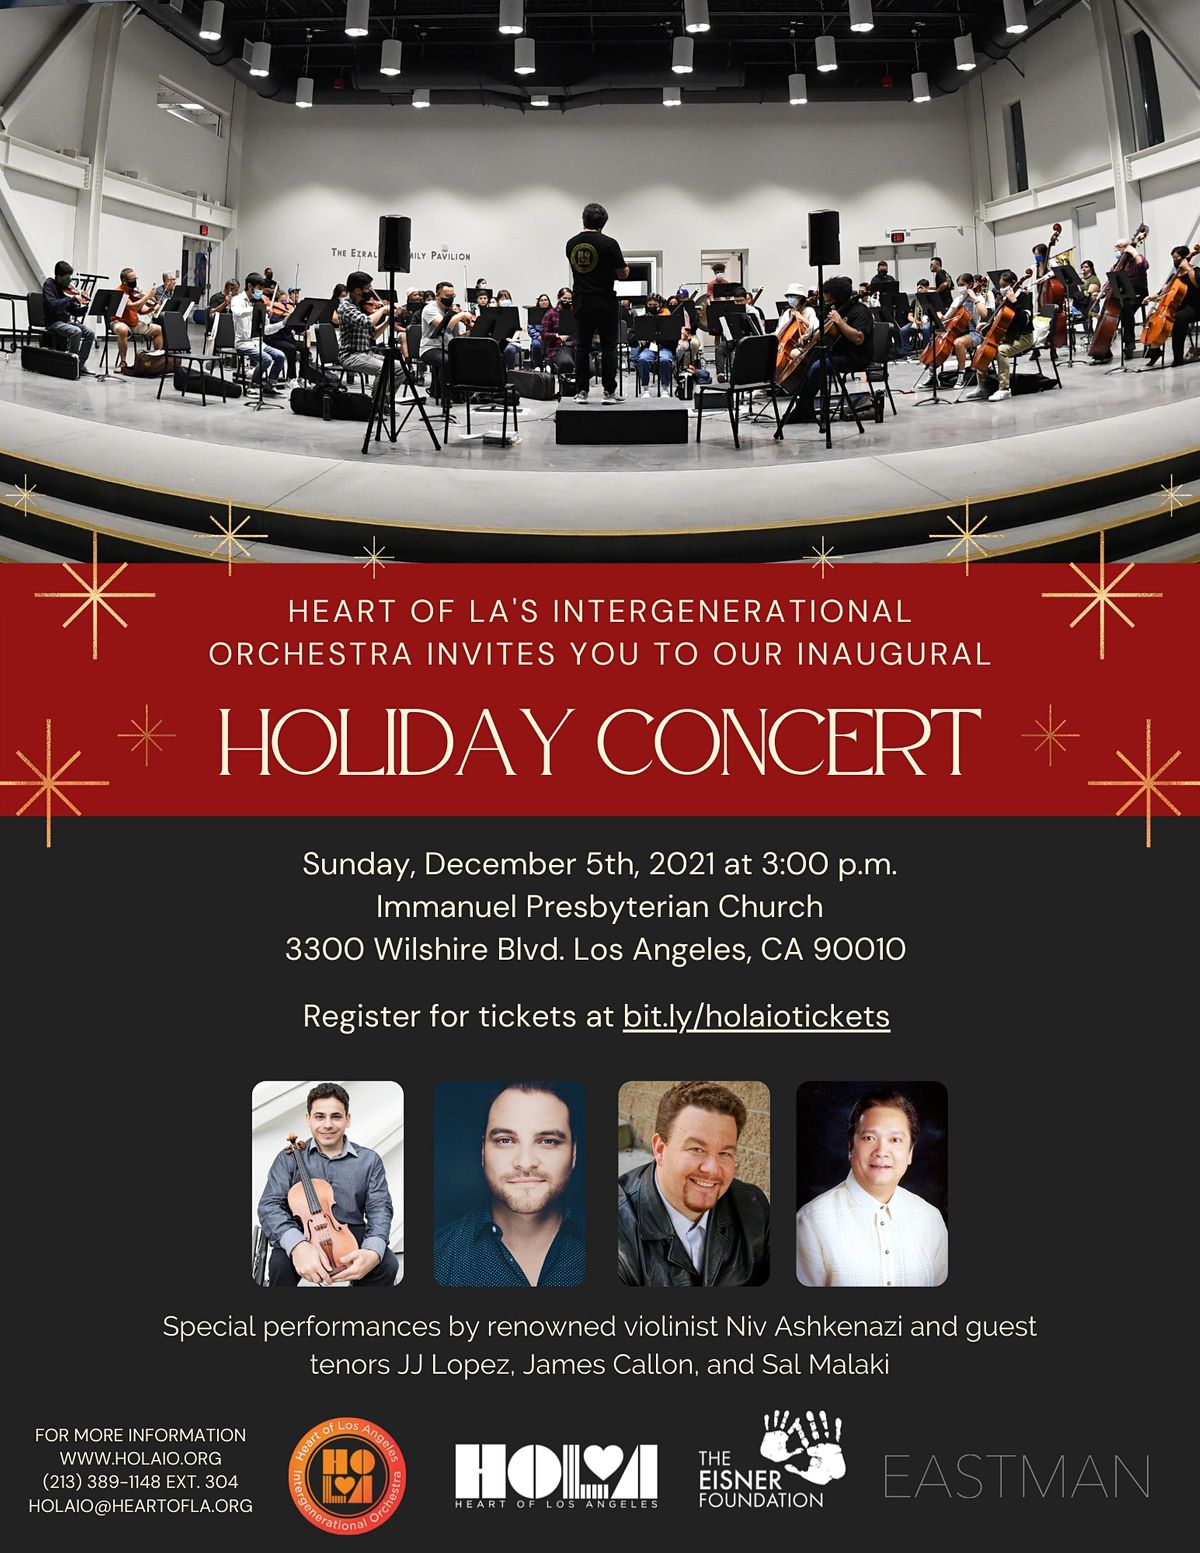 Intergenerational Orchestra Holiday Concert